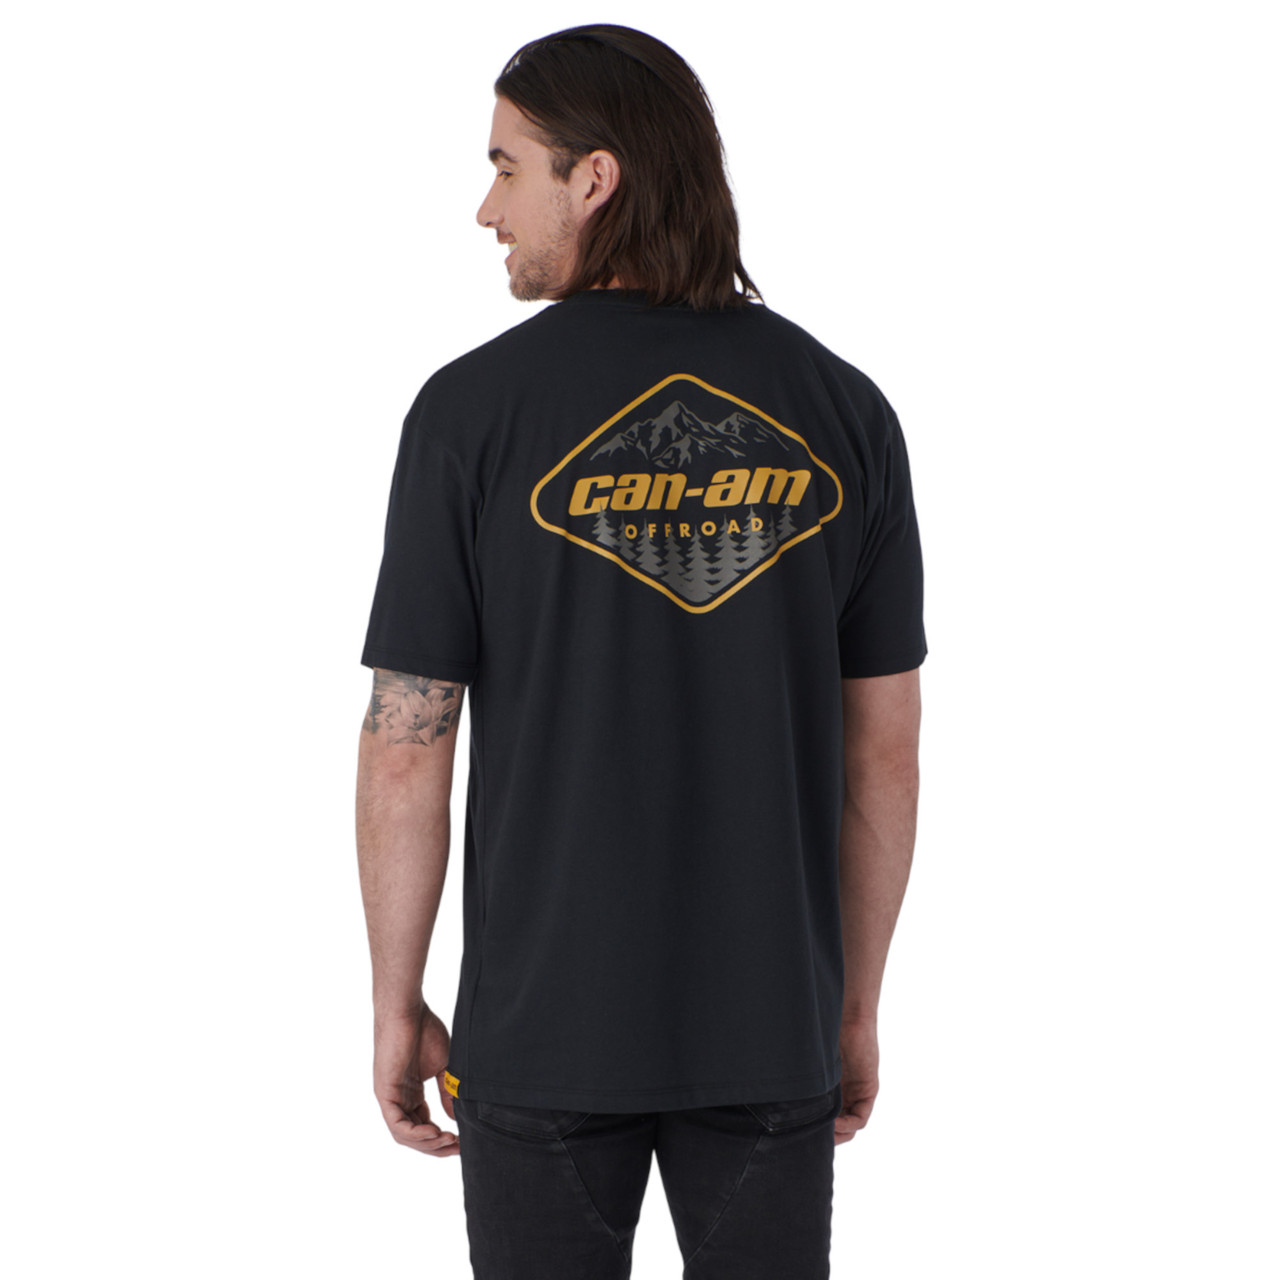 Can-Am New OEM, Men's Extra Large Cotton Branded Off-Road T-Shirt, 4547591290